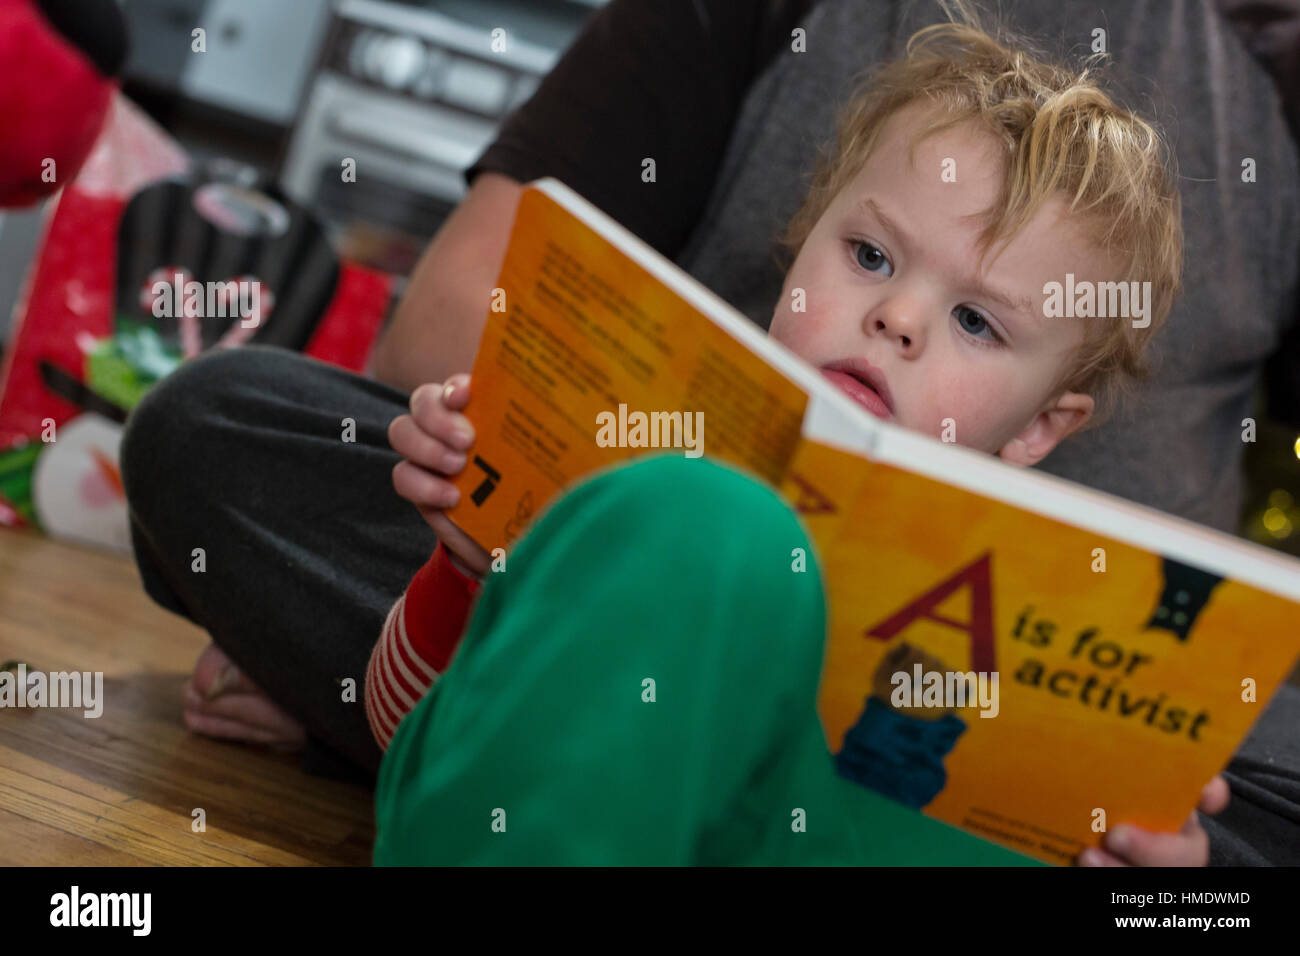 Denver, Colorado - Adam Hjermstad Jr., 2 1/2, reads a book, A is for Activist, that he was given for Christmas. Stock Photo